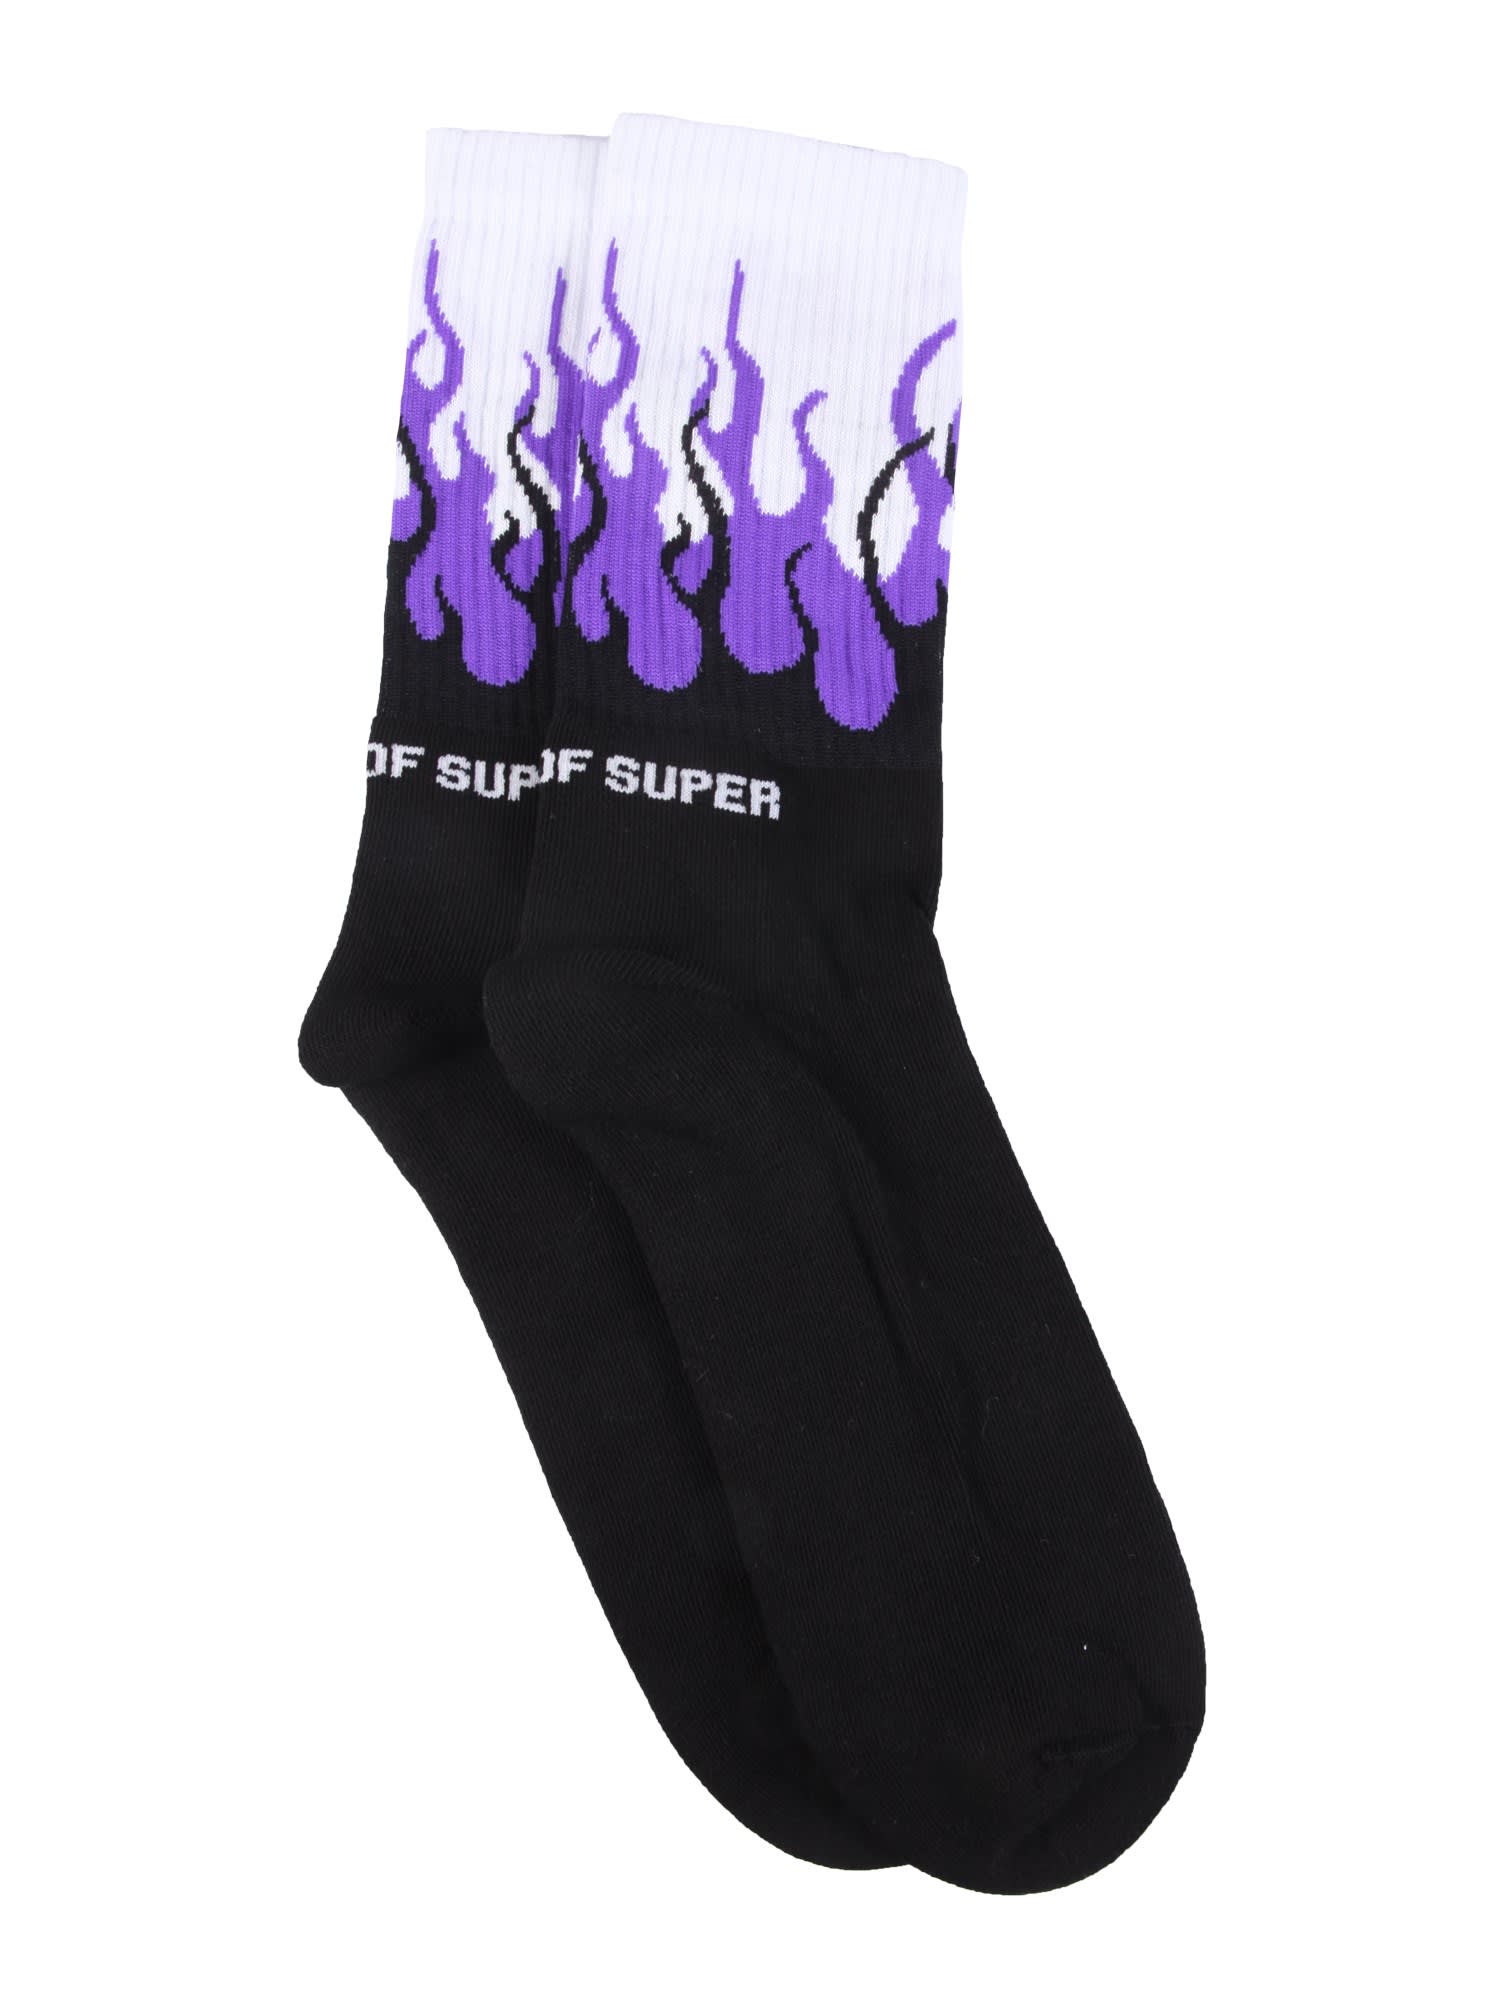 Vision of Super Socks With Fluo Flames